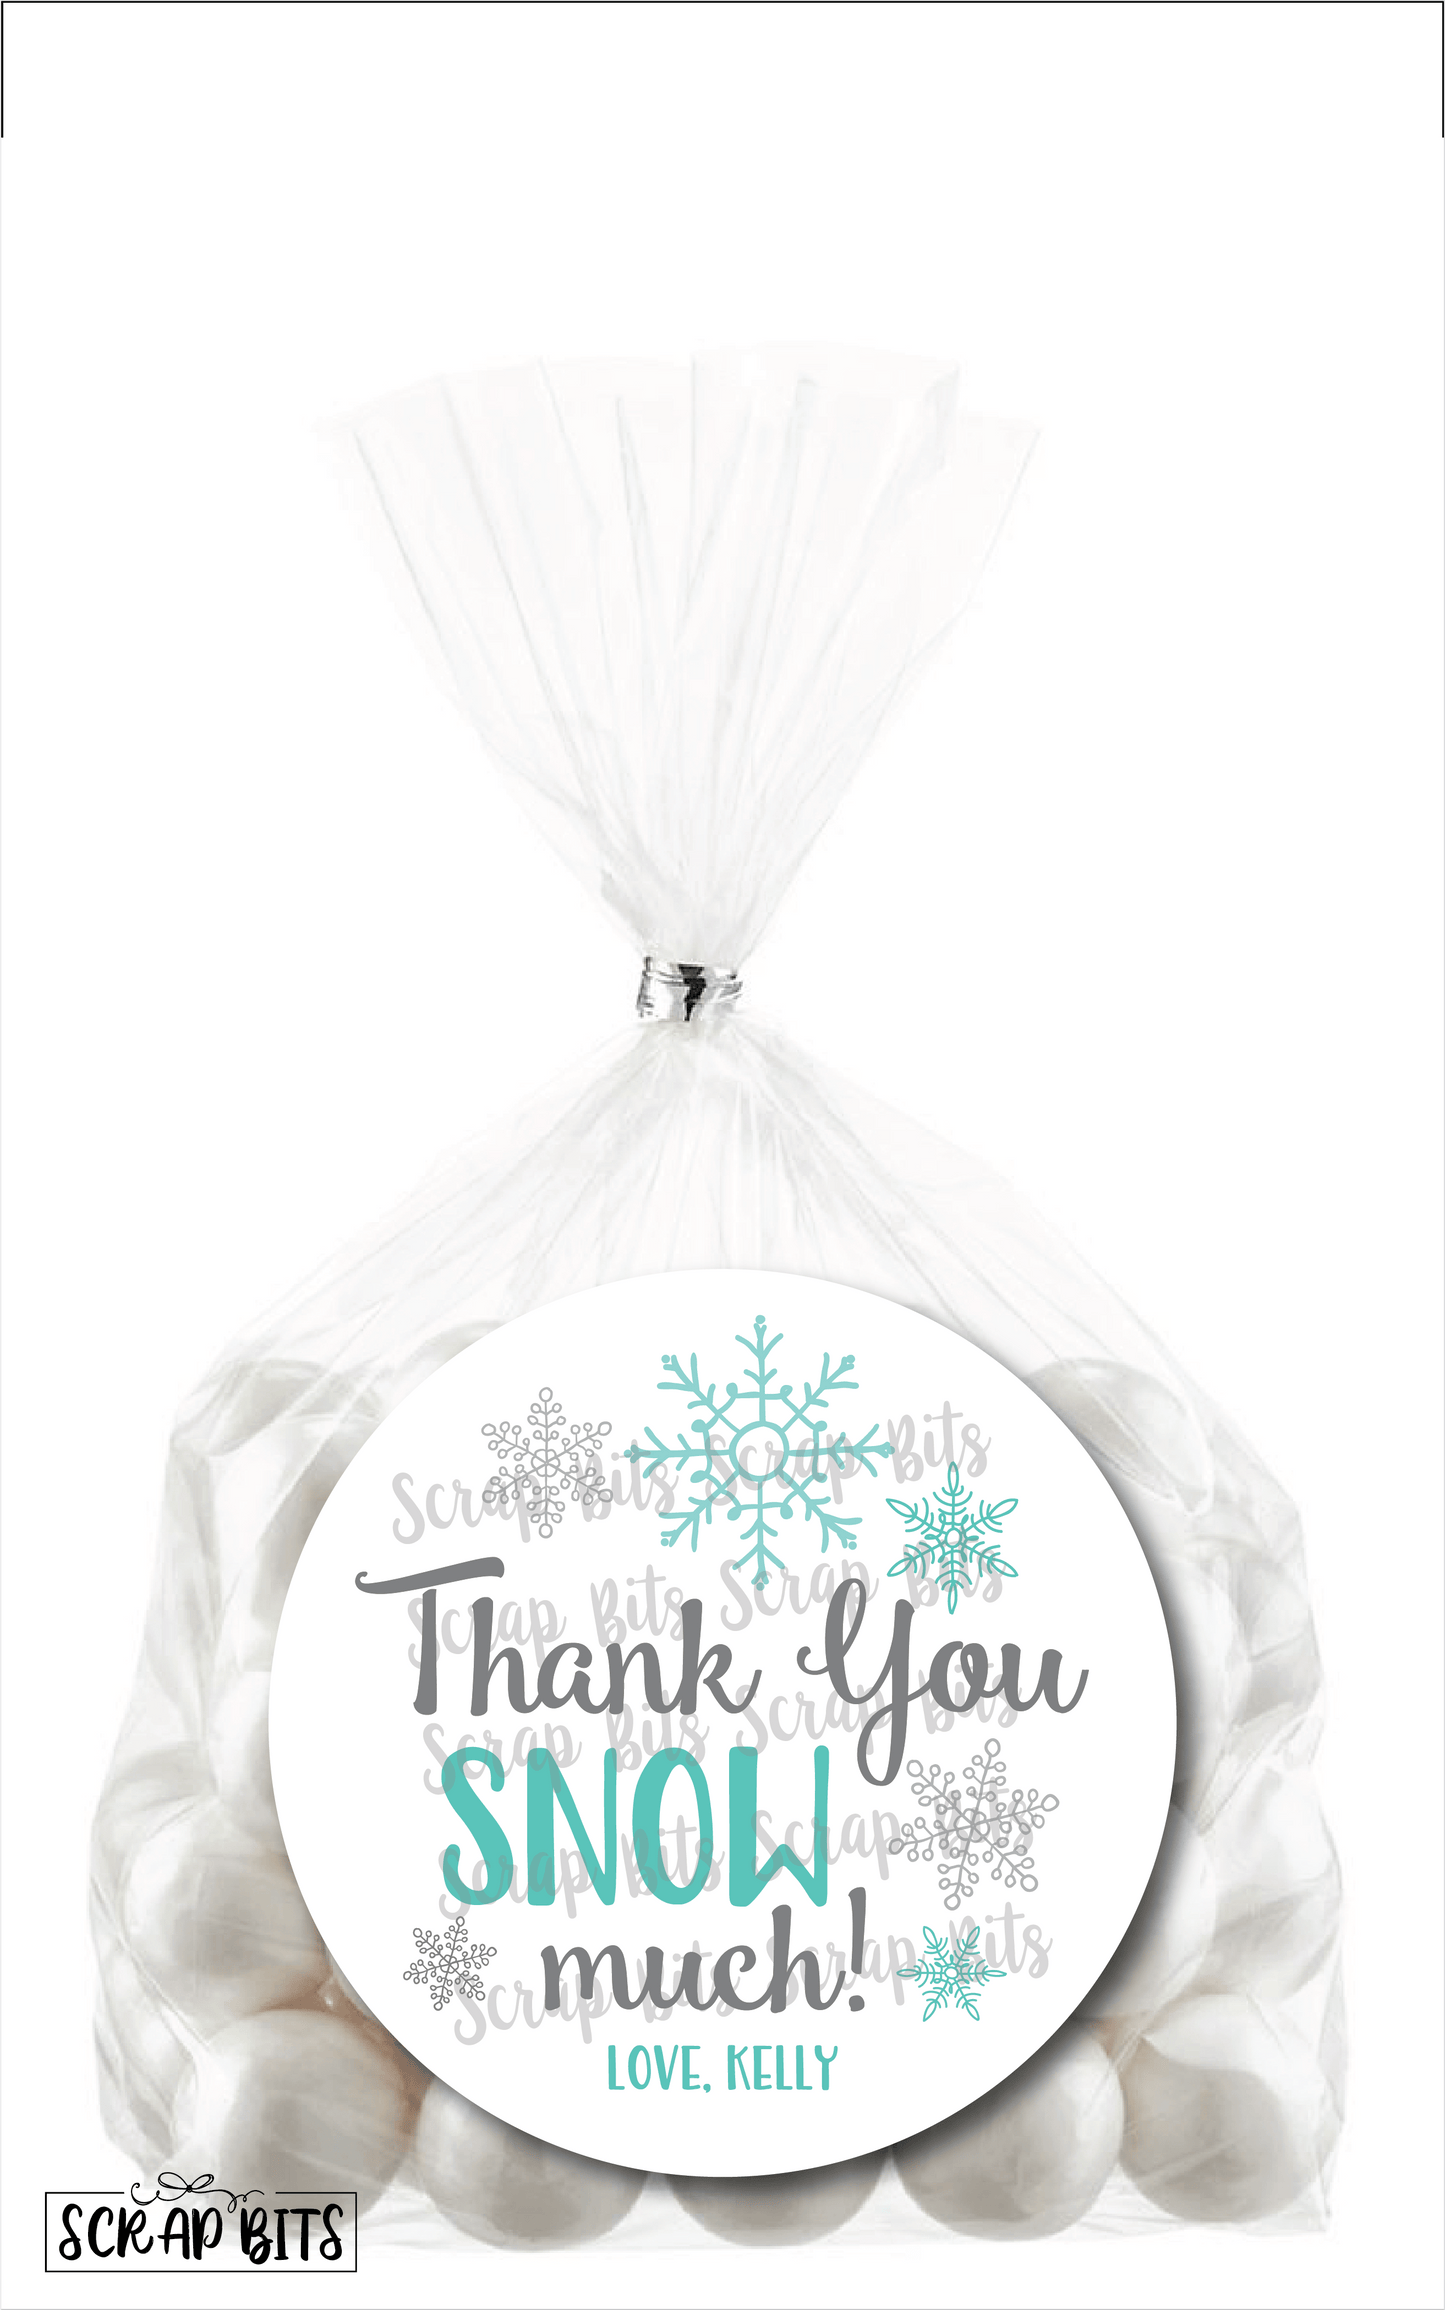 Thank You Snow Much Stickers or Tags . Snowflake Gift Labels - Scrap Bits